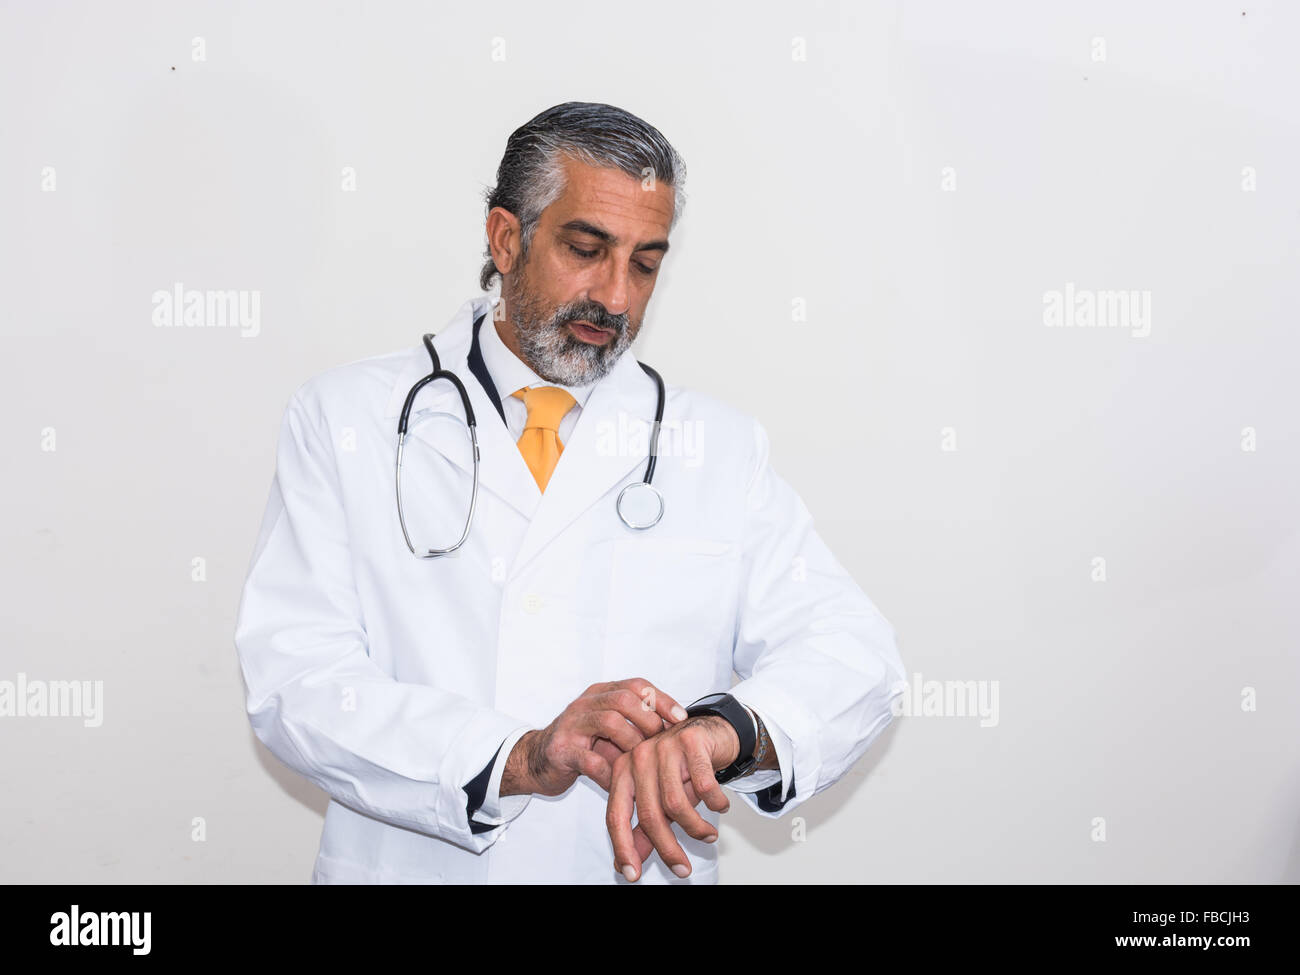 Doctor uses the smartwacth. Even doctors and medicals, like other professionals, using new technologies such as smartwacth, Stock Photo